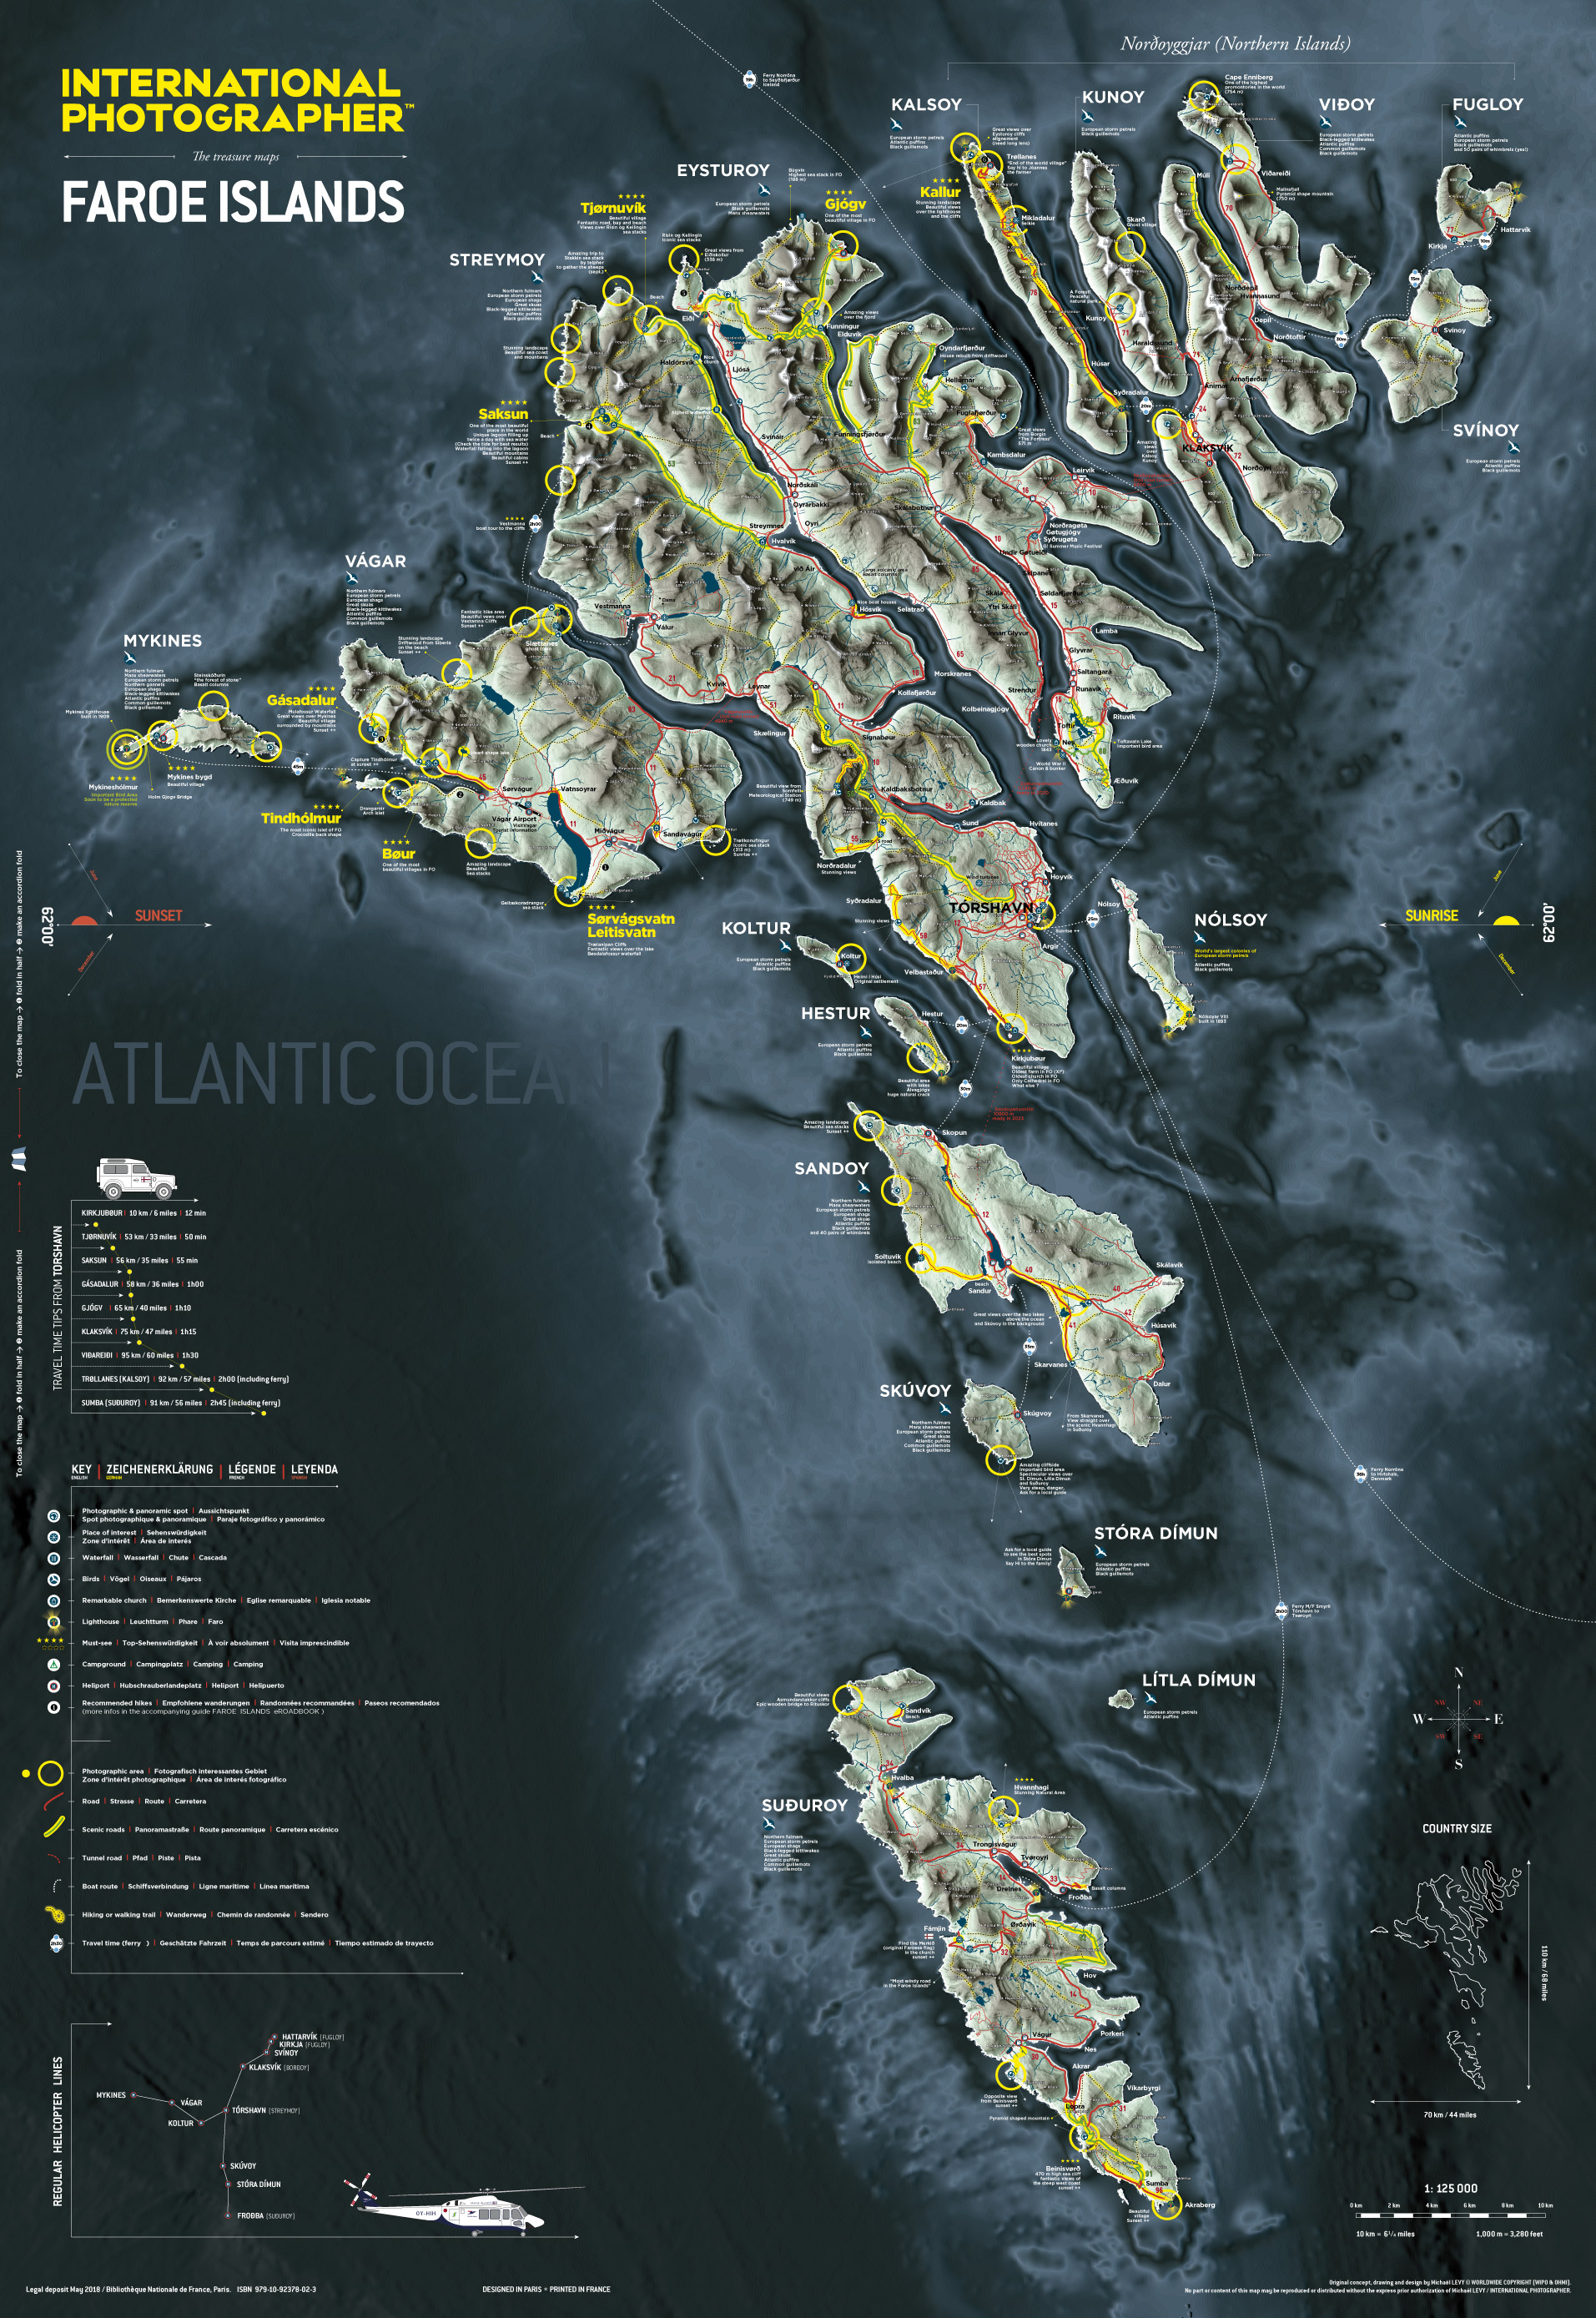 1st Map Of The Faroe Islands For Photographers Landscape And Travel Photography Forum Digital Photography Review